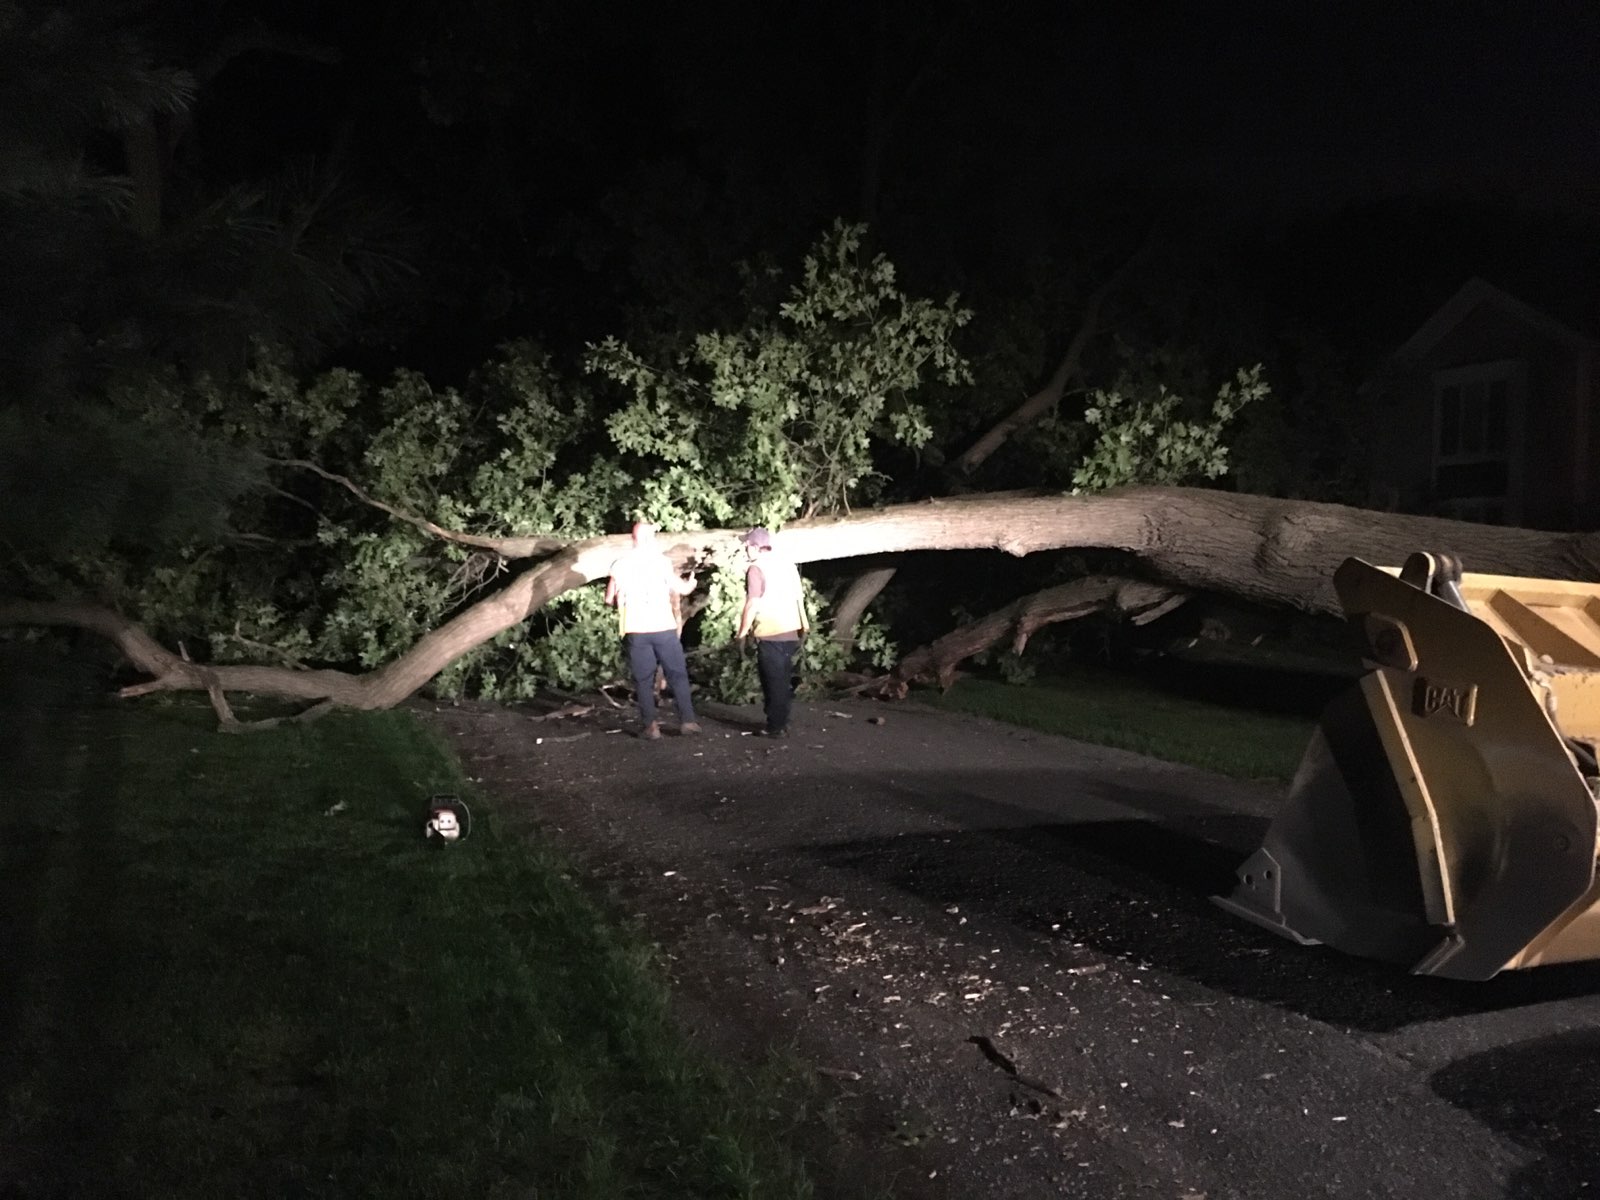 Giant tree down on Evergreen Rd in Granger prompts VEST to block off the road while county crews arrive with needed apparatus